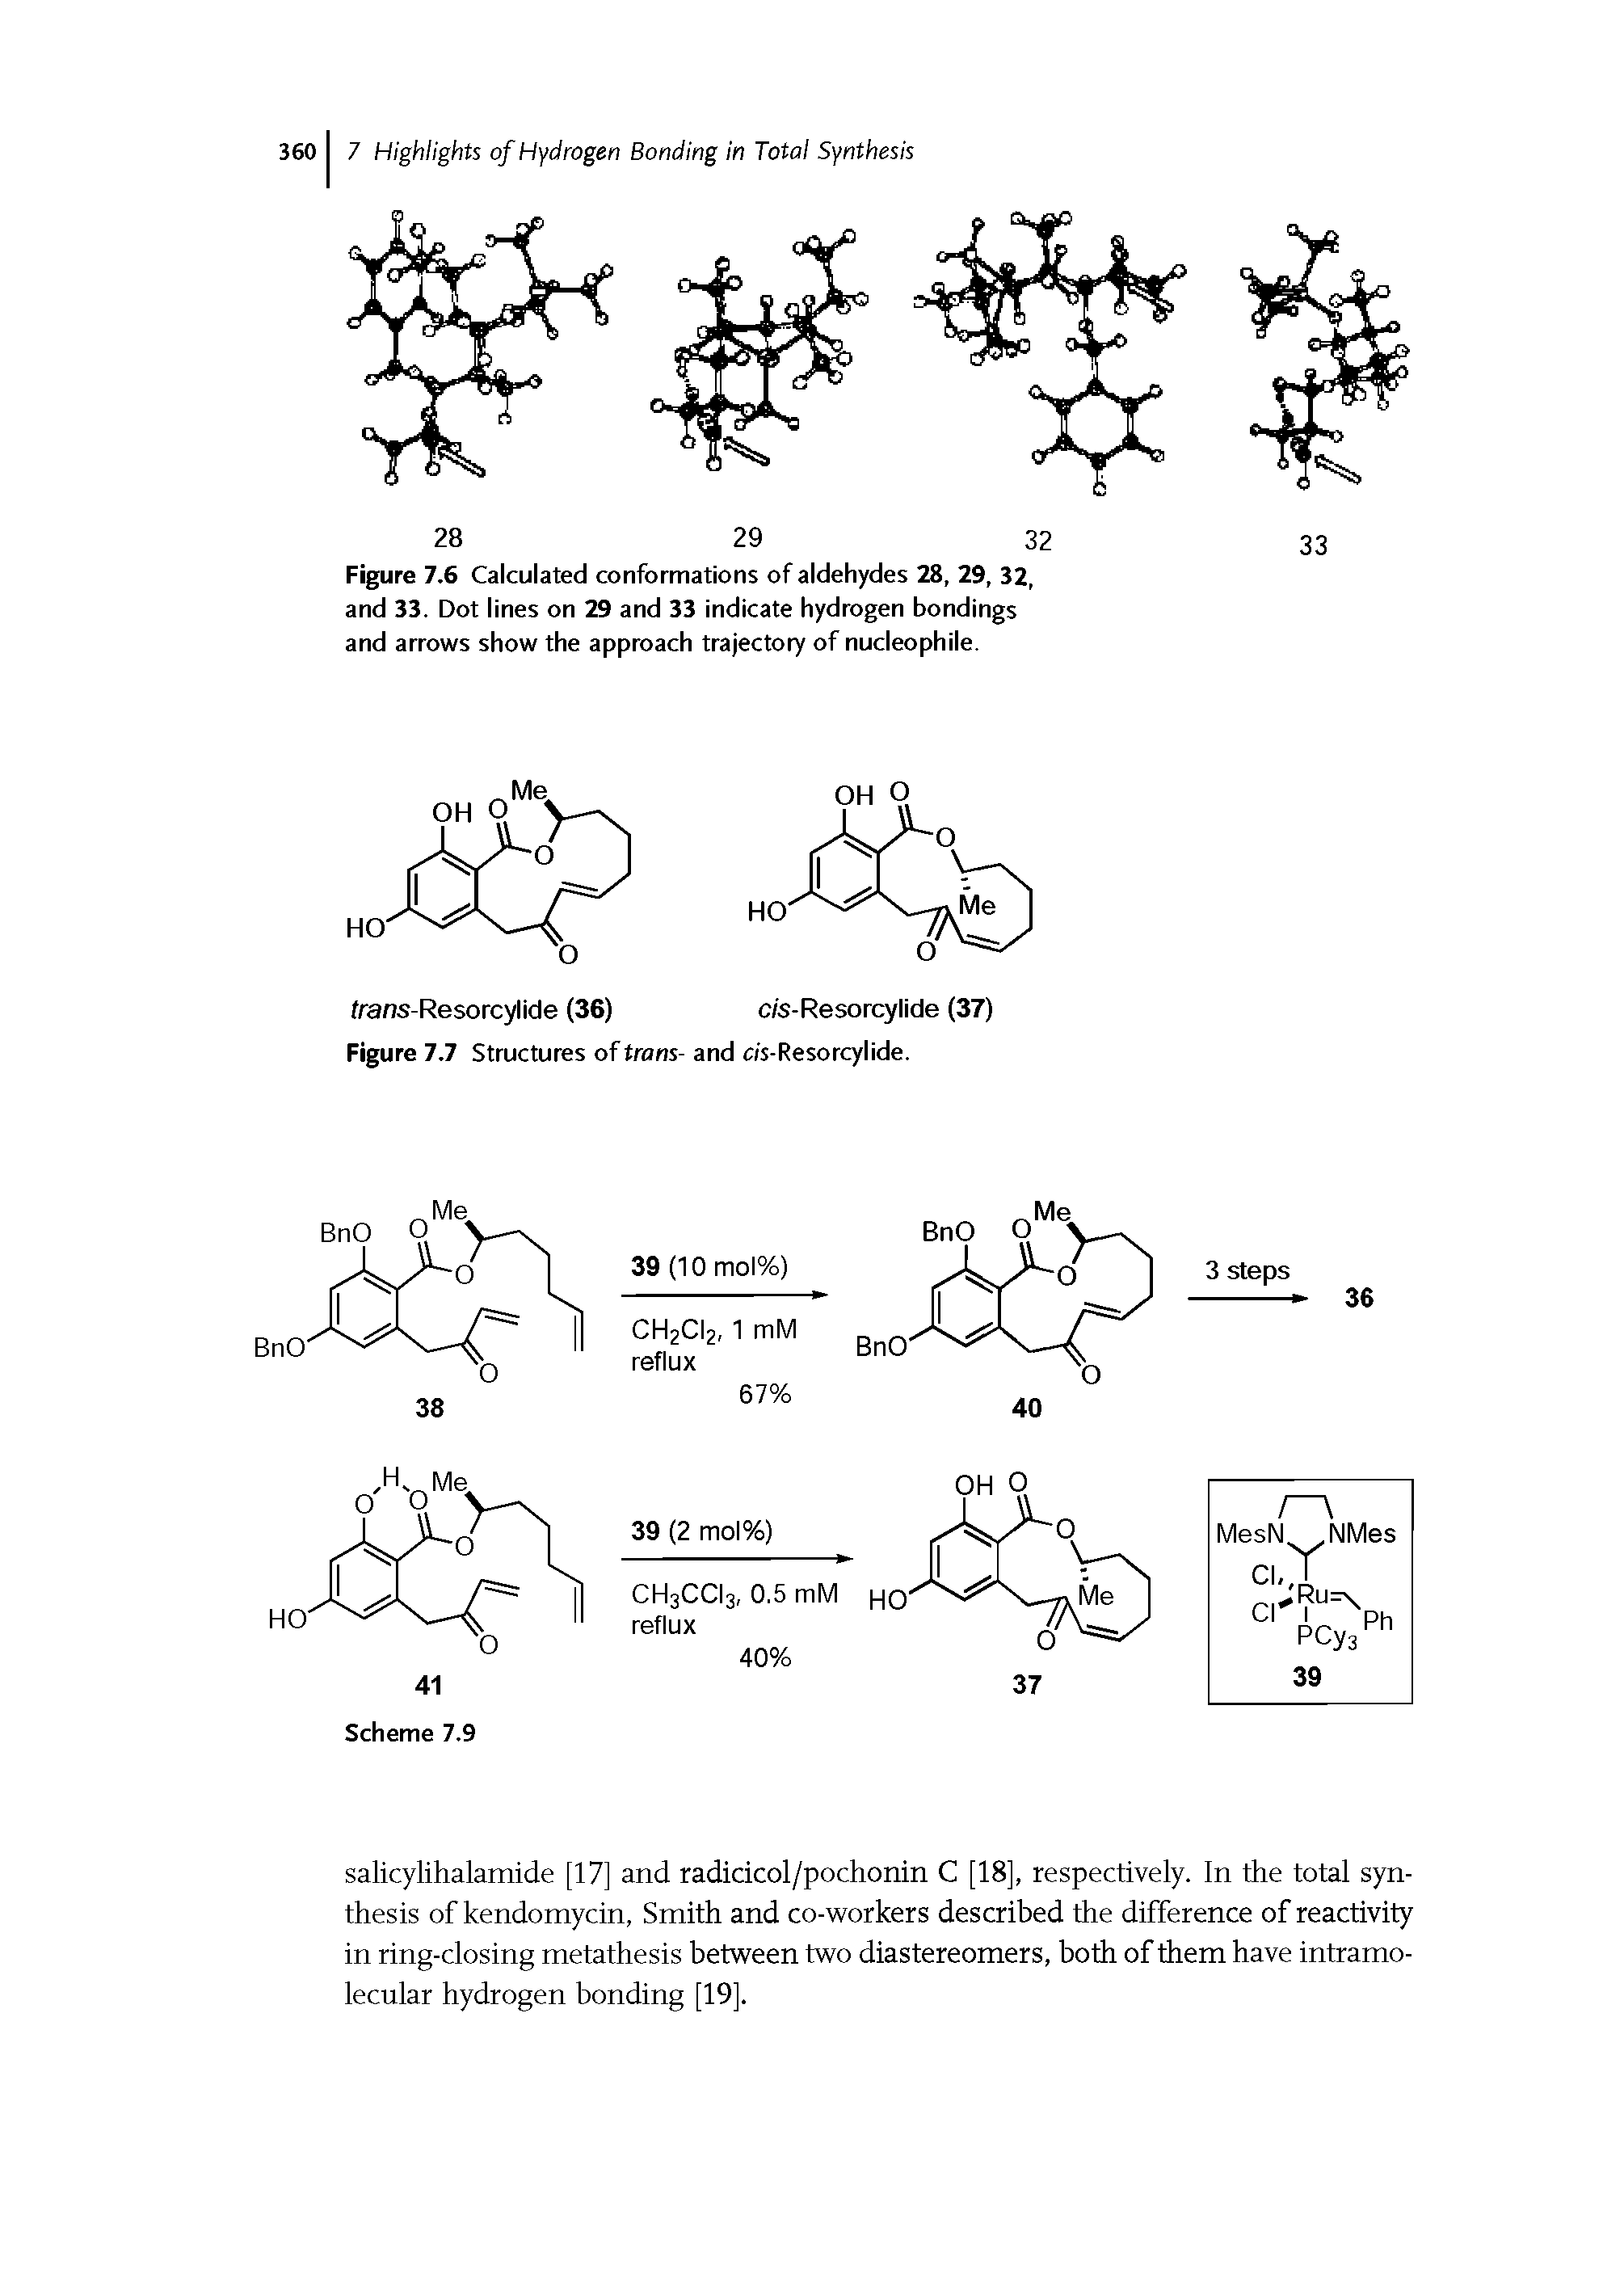 Figure 7.6 Calculated conformations of aldehydes 28, 29, 32, and 33. Dot lines on 29 and 33 indicate hydrogen bondings and arrows show the approach trajectory of nucleophile.